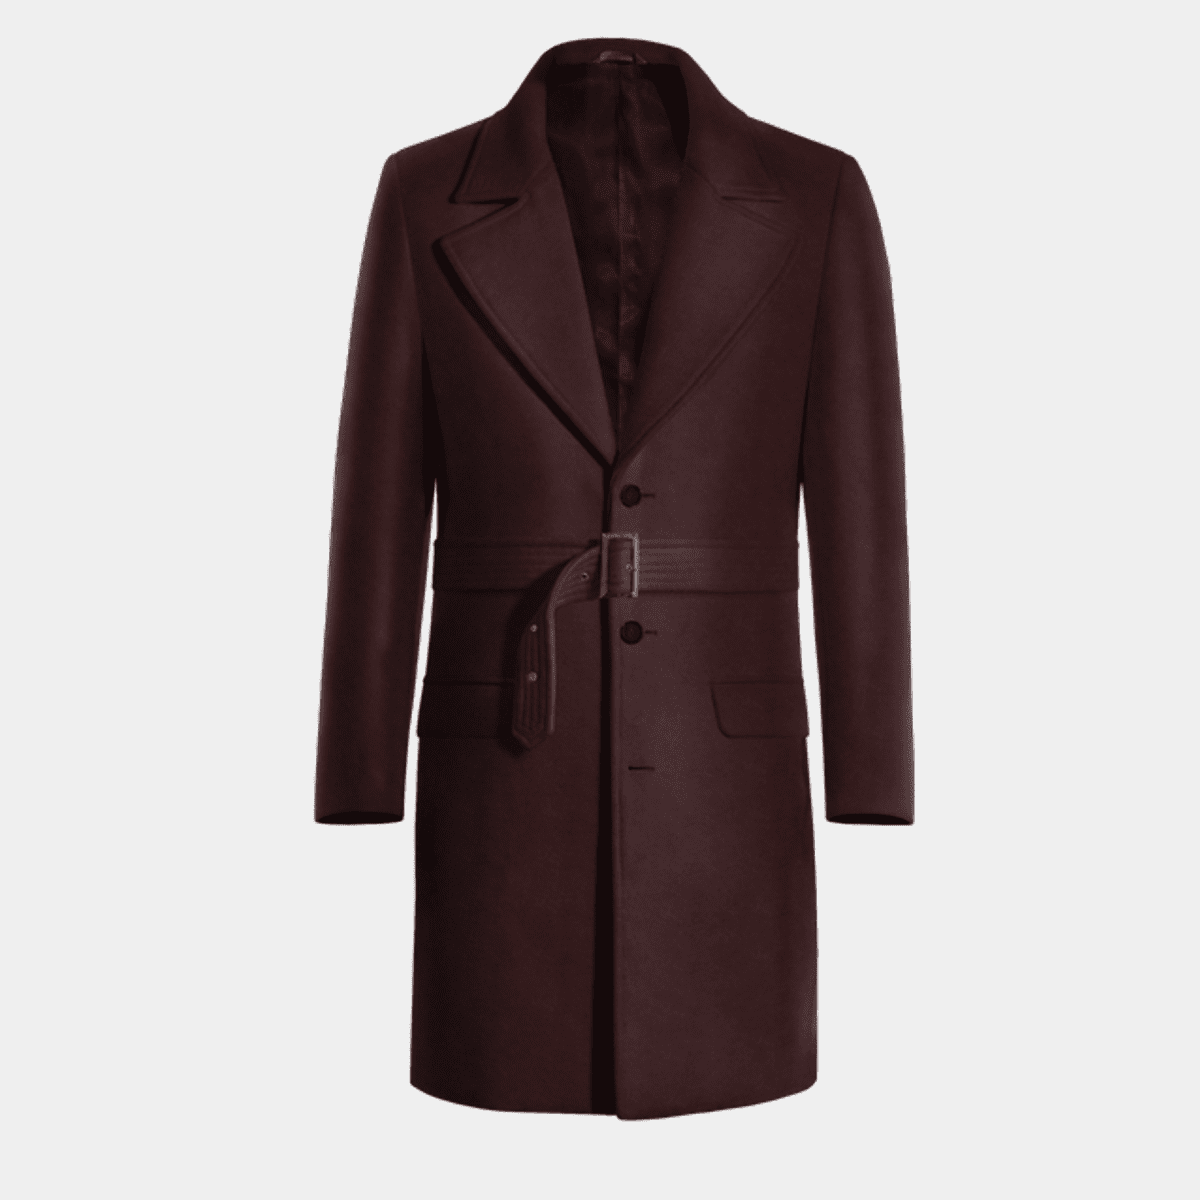 Frock Coats  The Perfect wedding suit - Hockerty